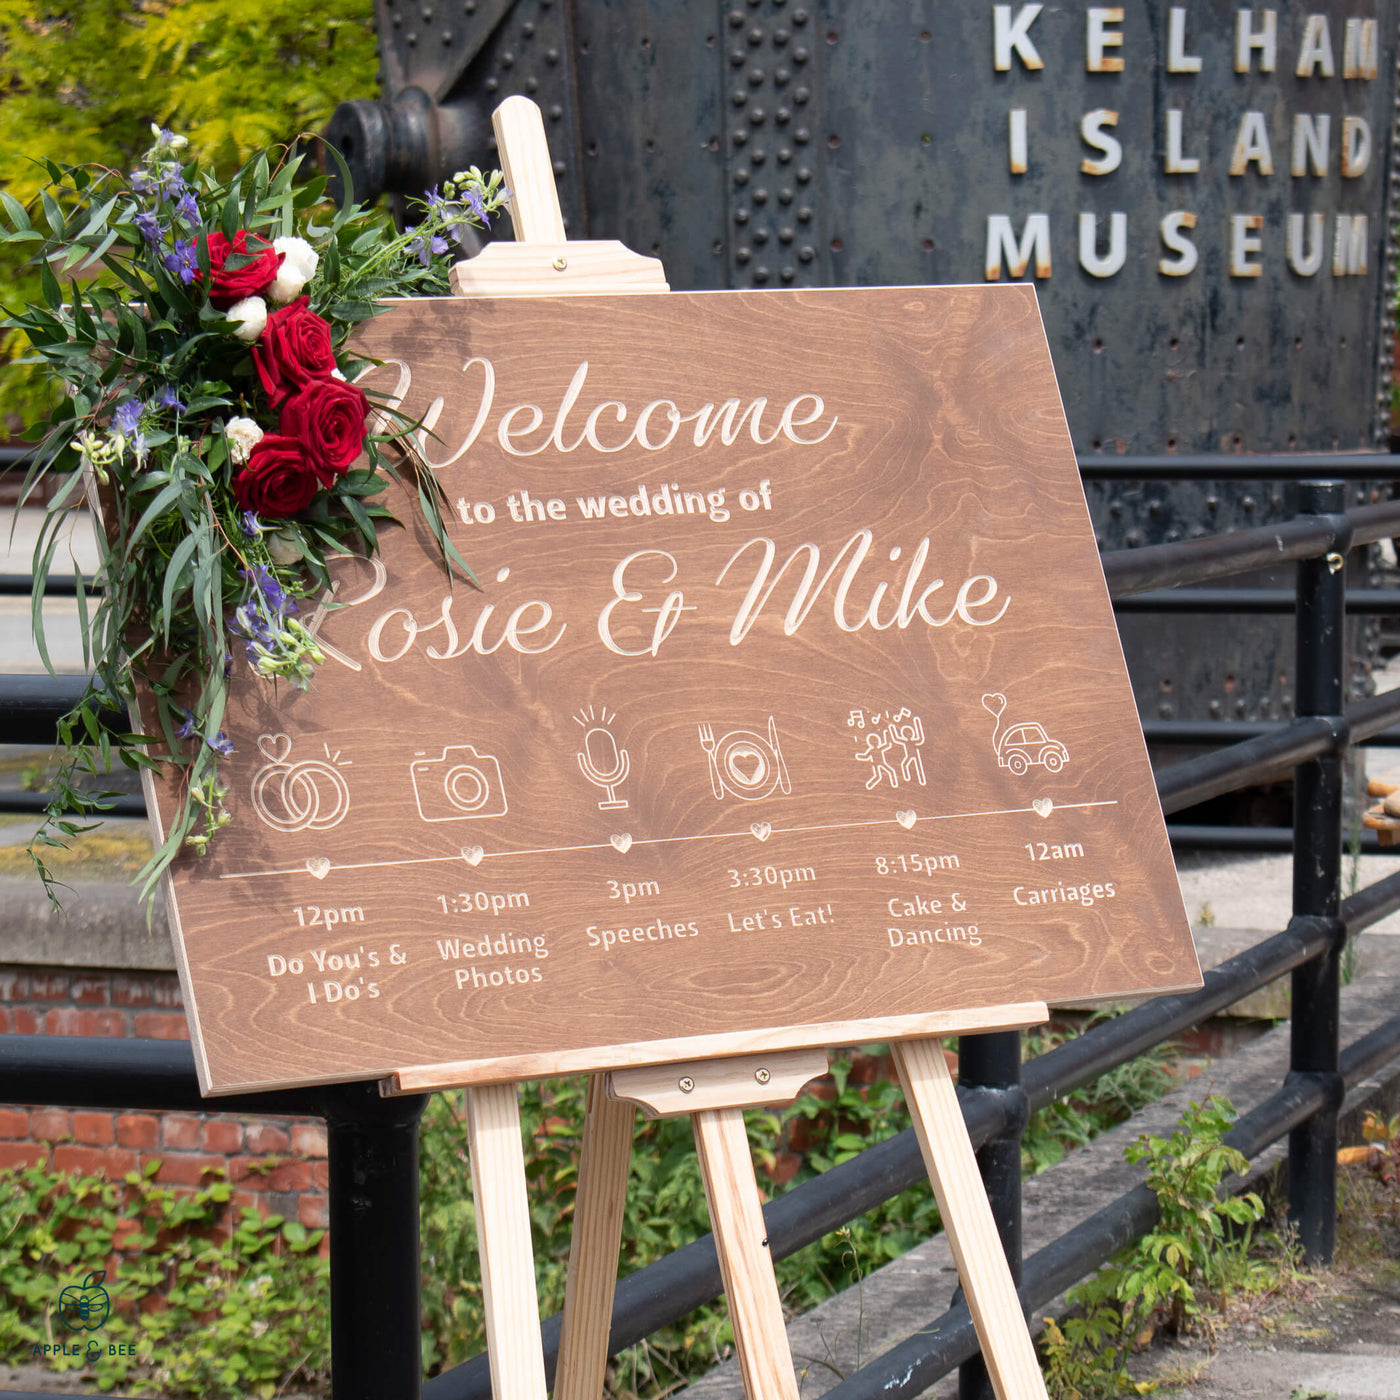 'The Whitley' Order of the Day Wedding Sign